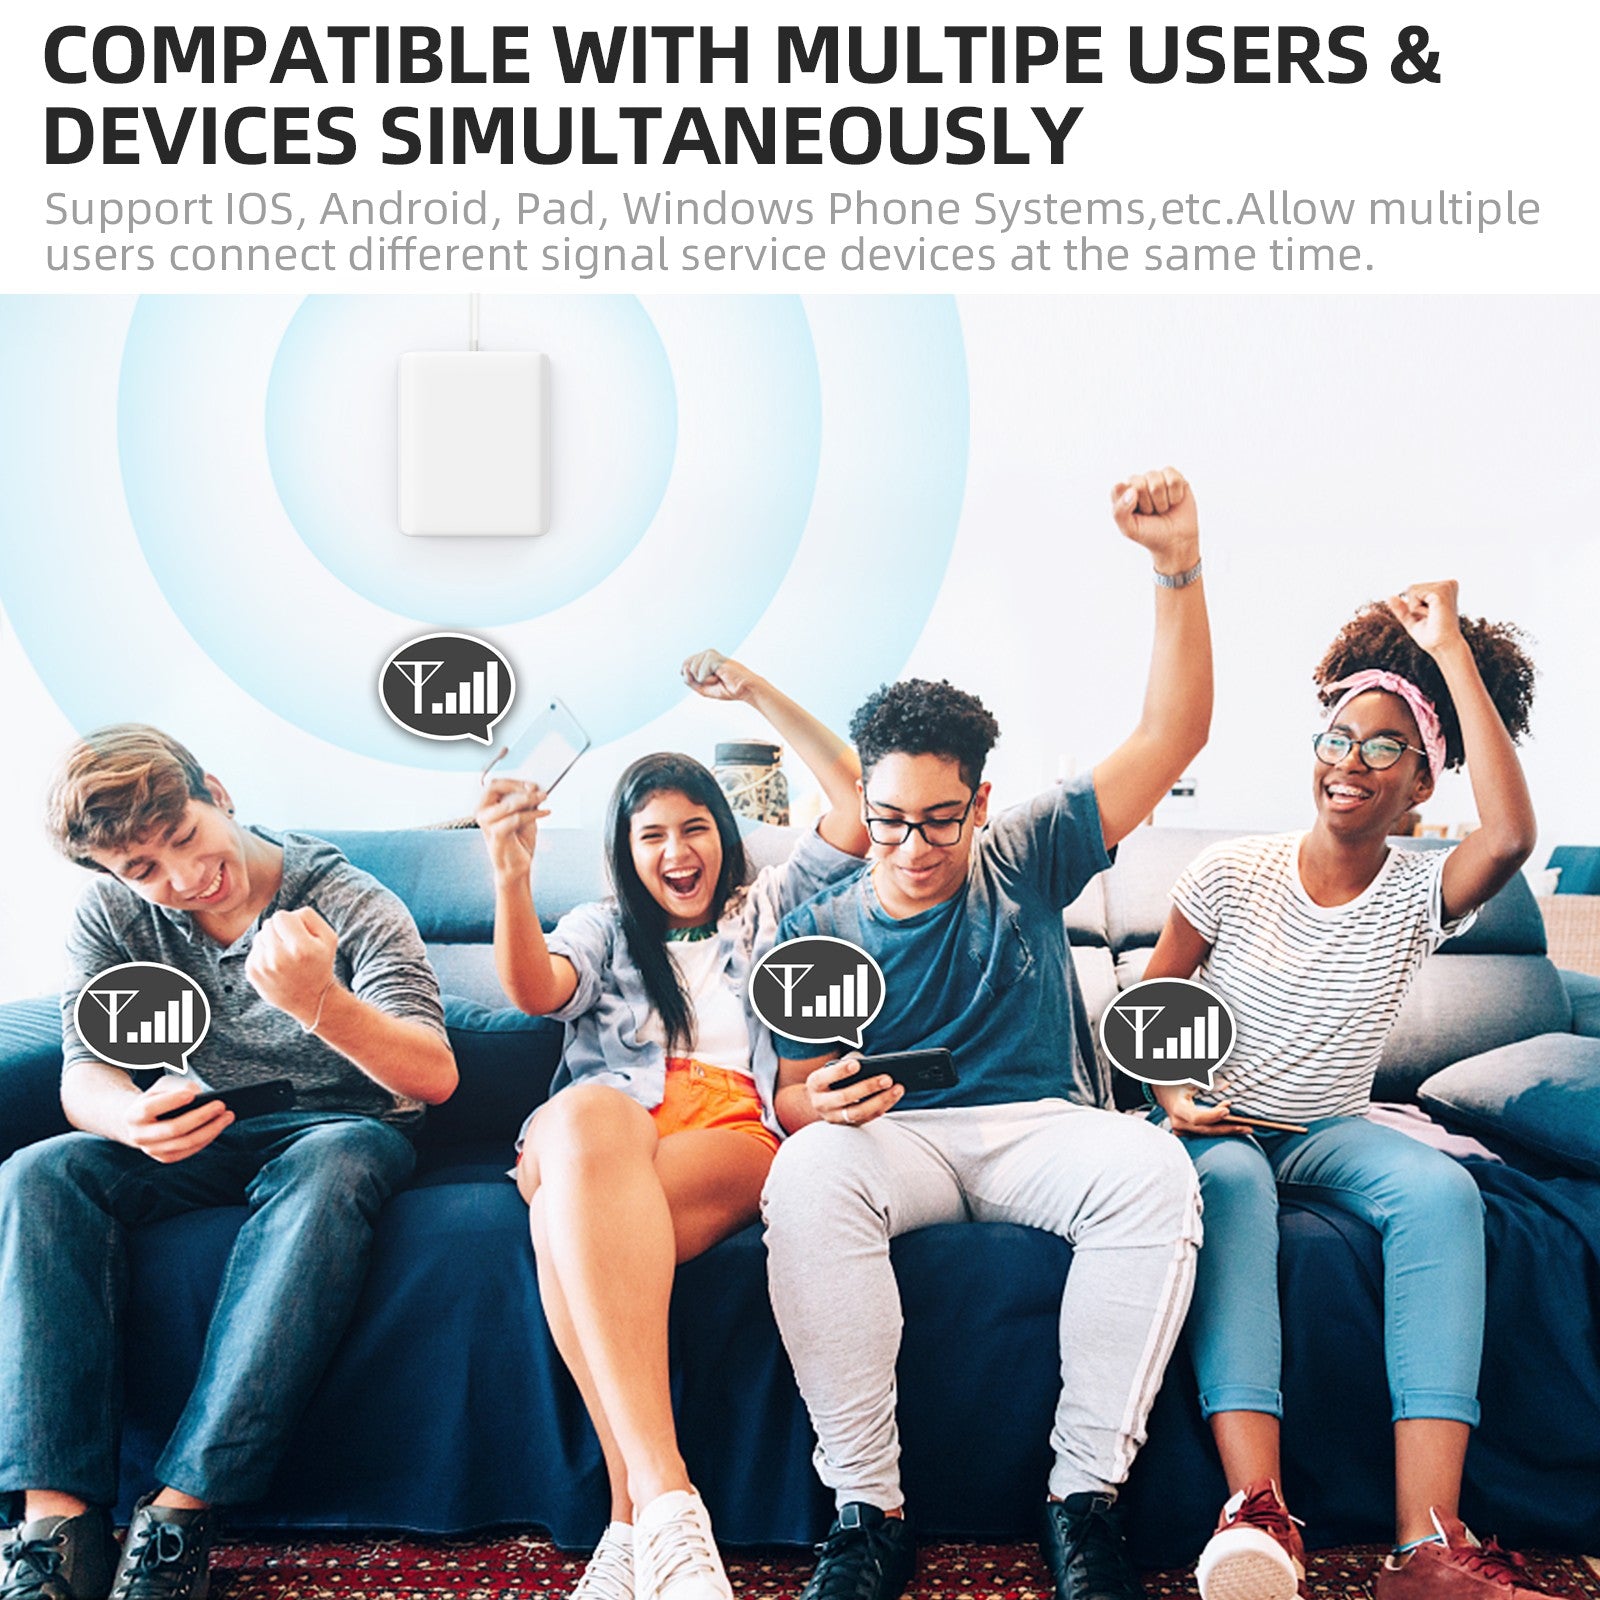 GOBOOST Signal booster Compatible with Multipe USERS